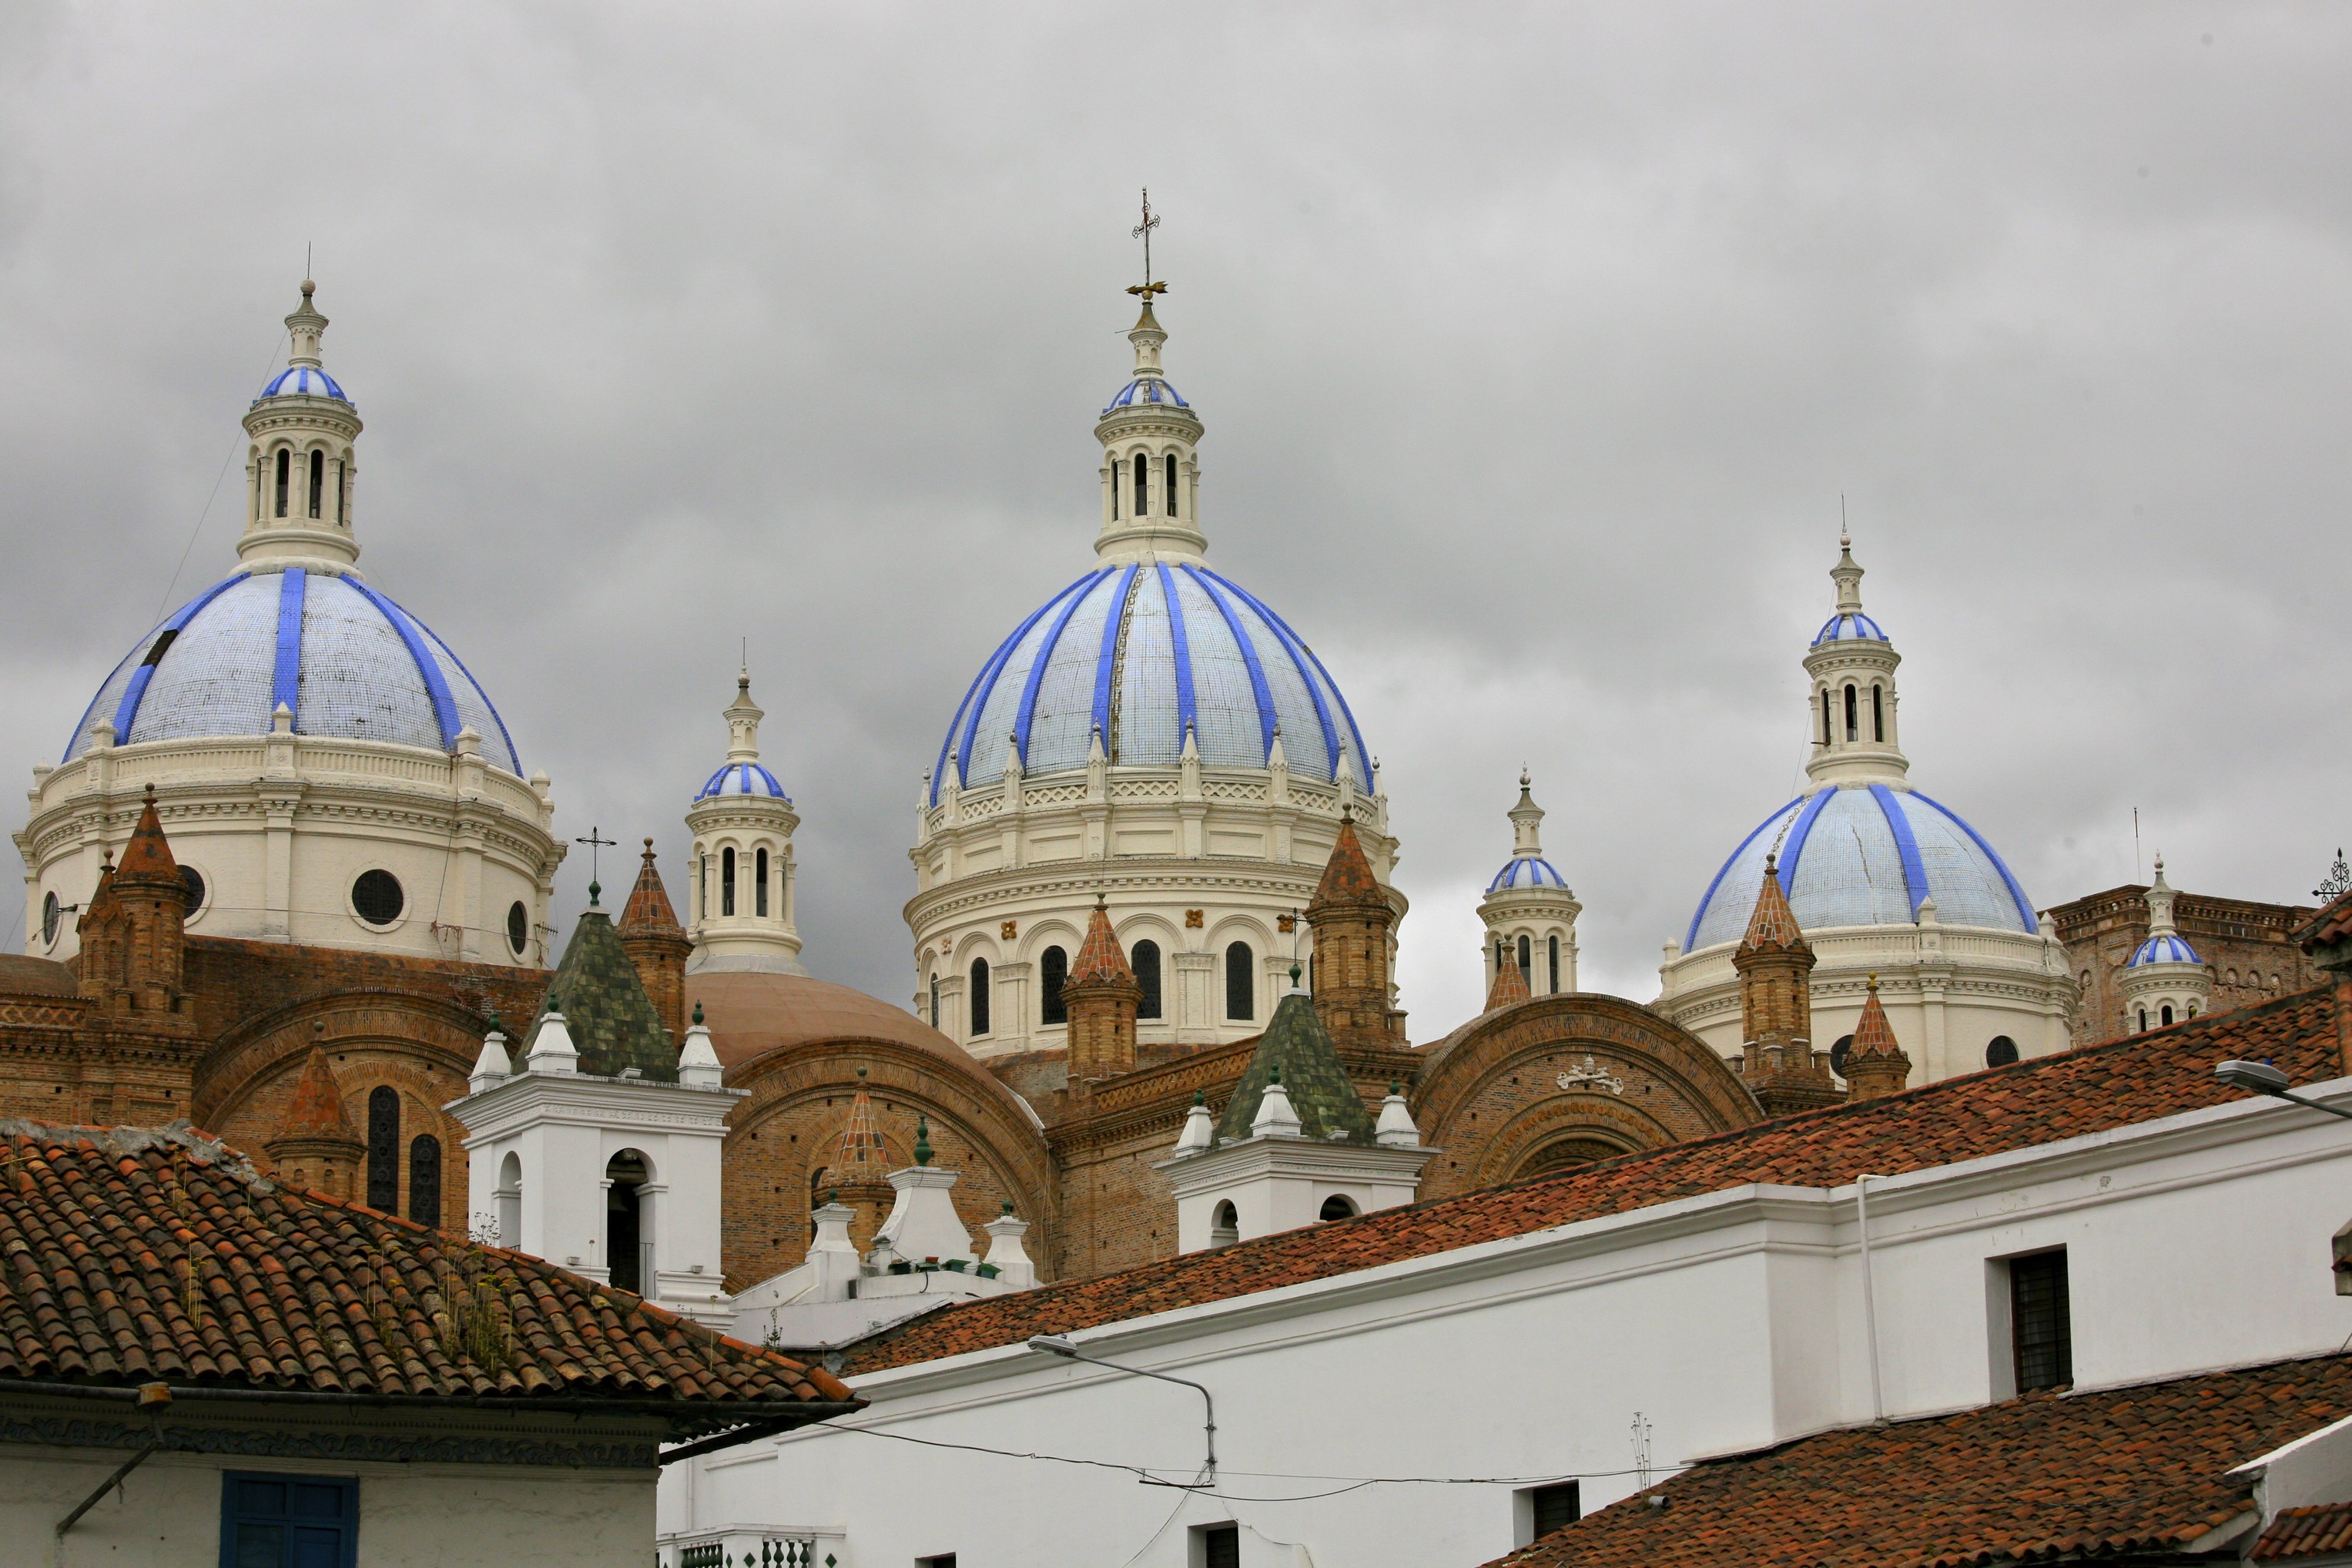 File:Domes of the New Cathedral in Cuenca, Ecuador.jpg - Wikimedia ...